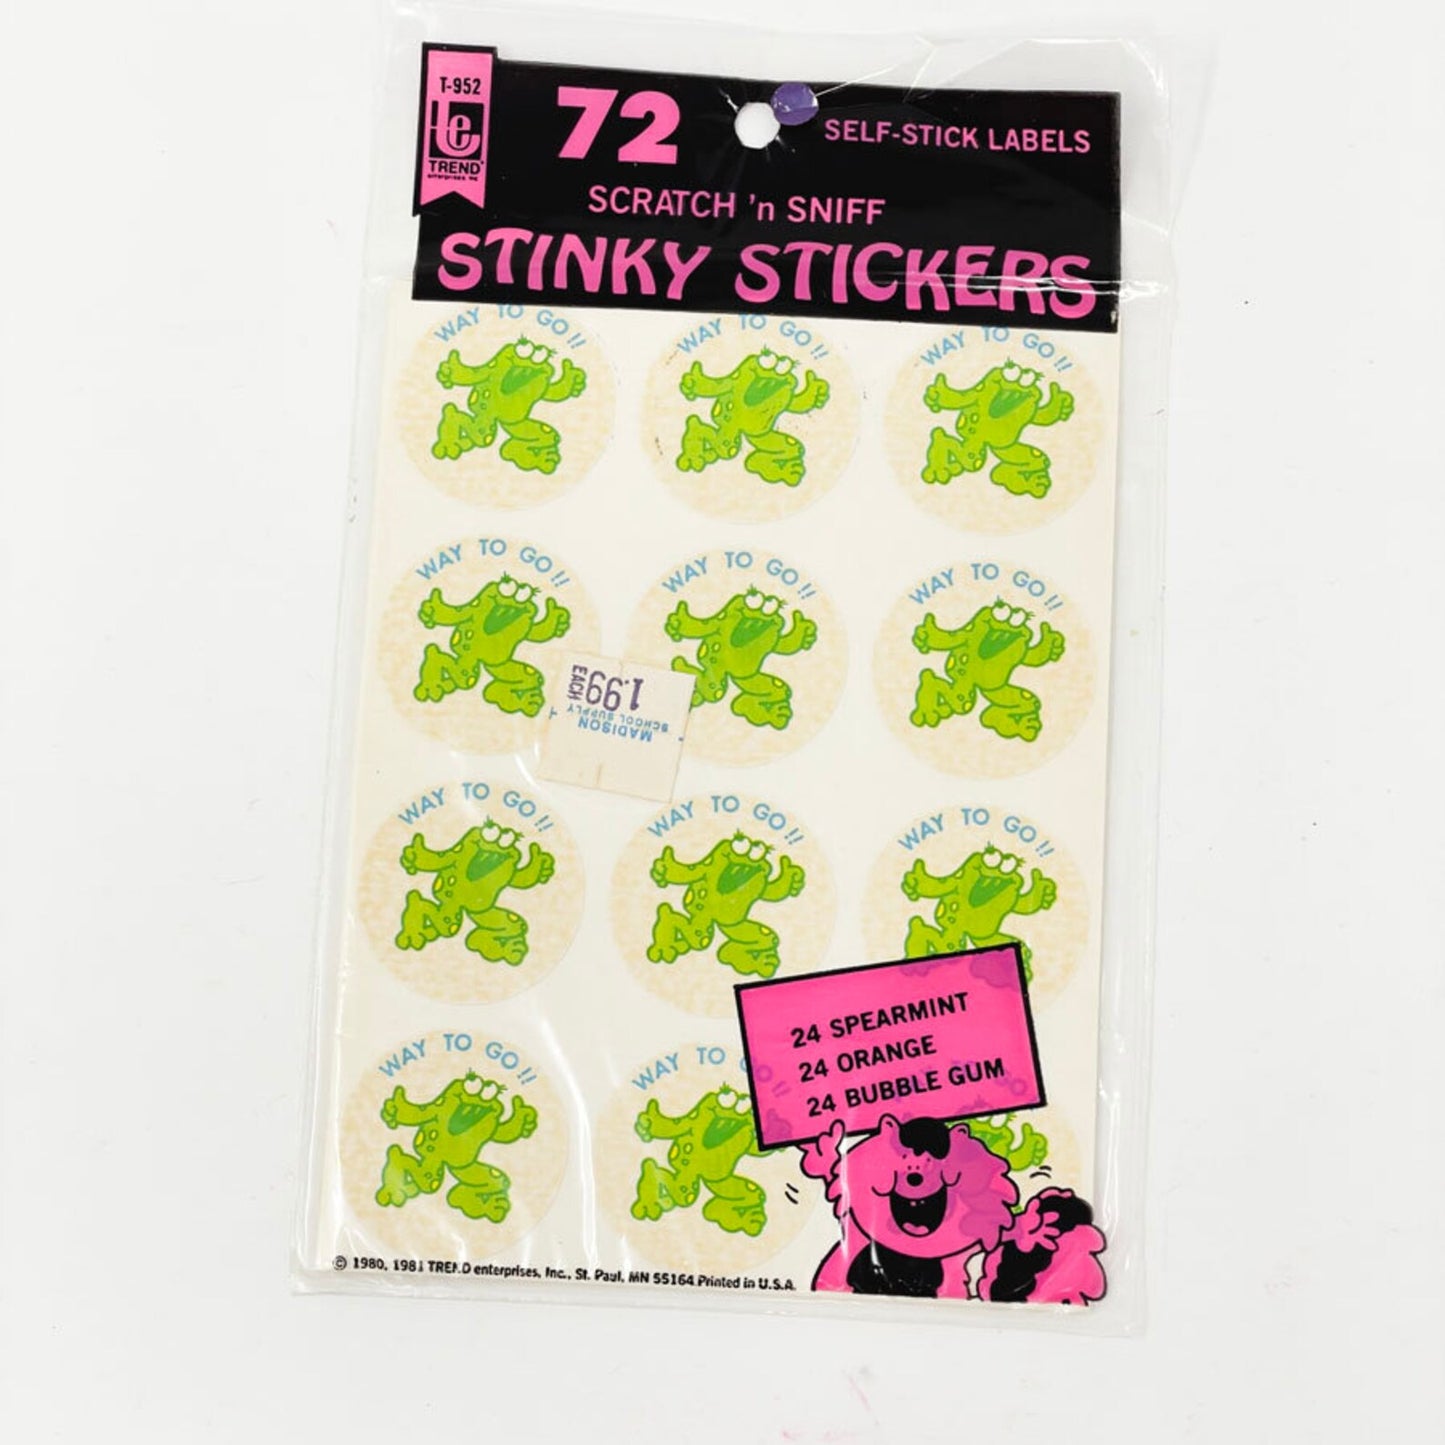 1980s Trend Scratch & Sniff Stinky Stickers - Spearmint, Orange, and Bubble Gum - Unopened Pack